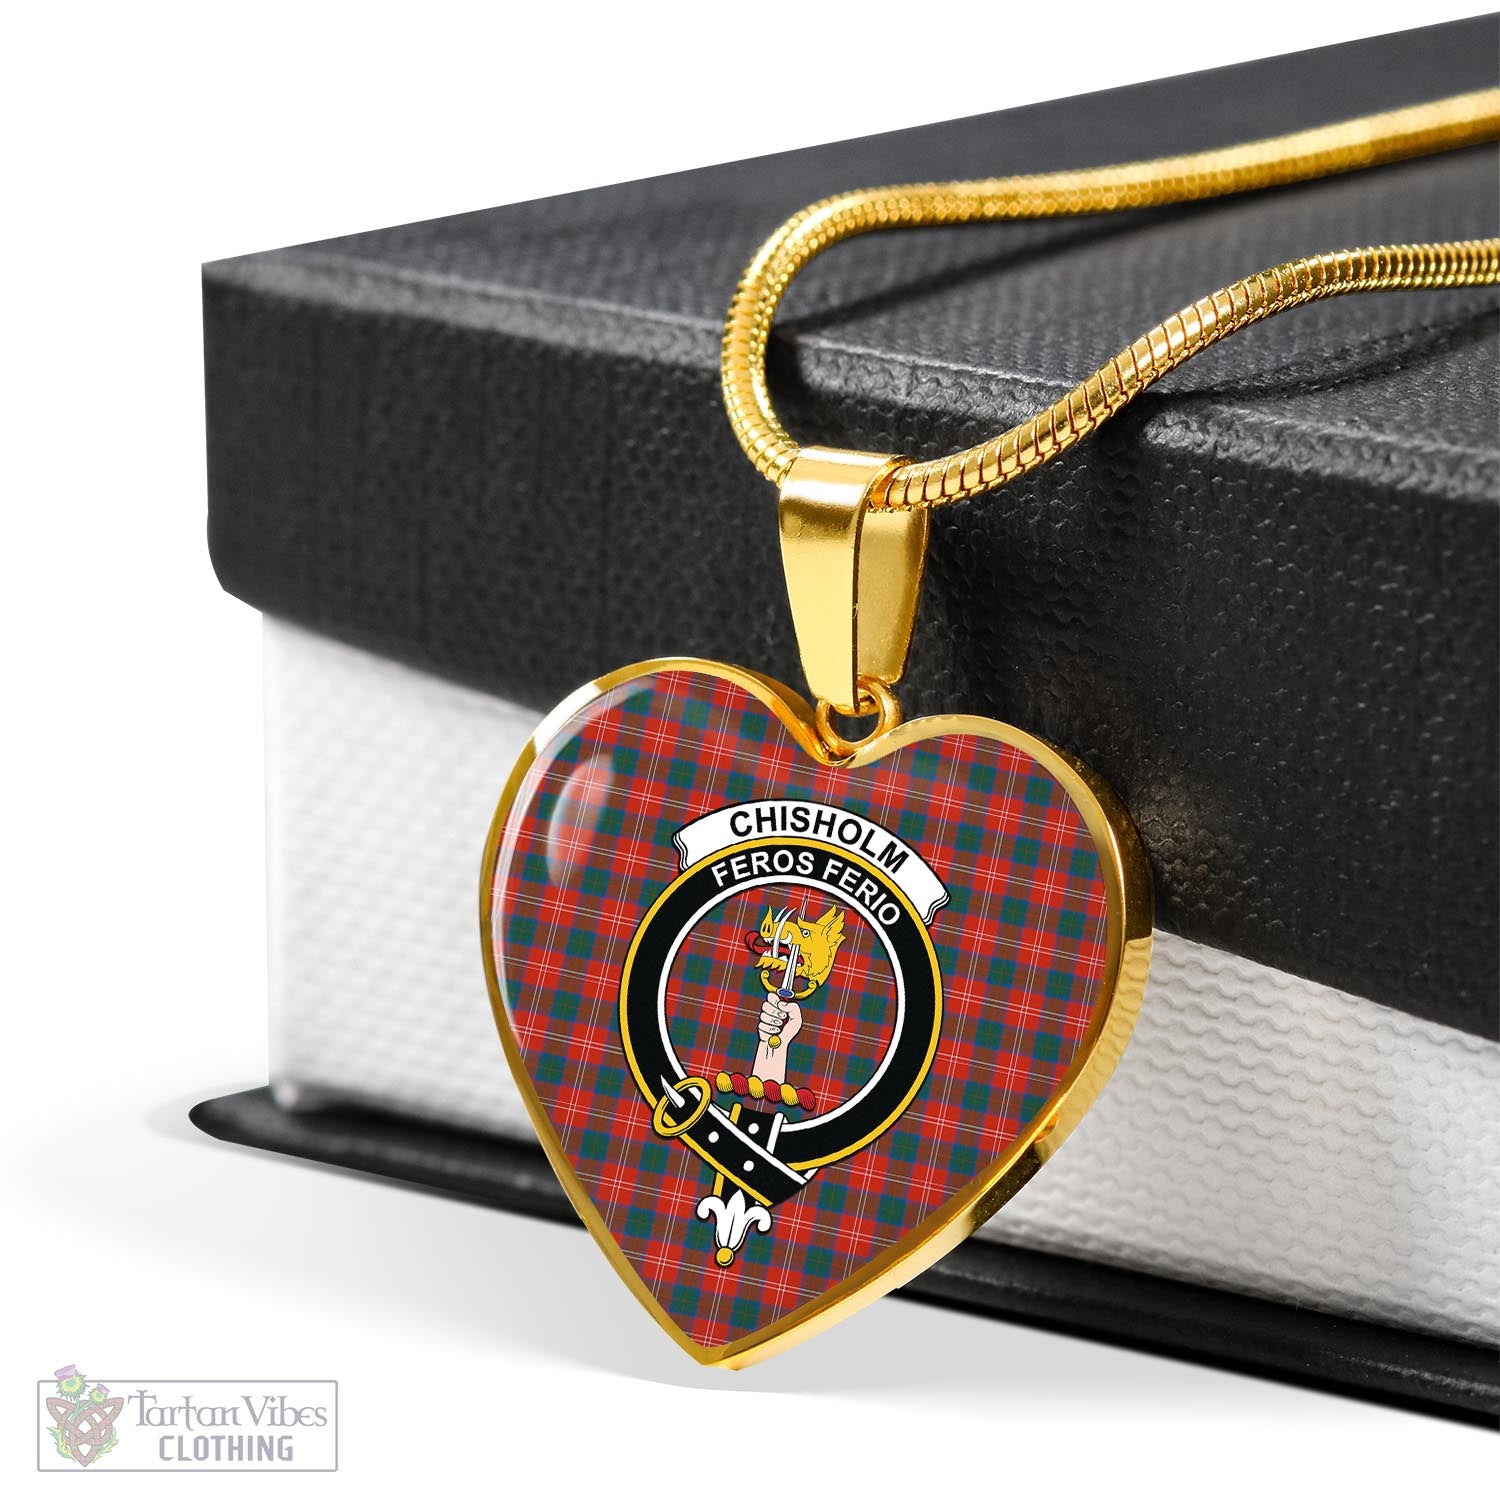 Tartan Vibes Clothing Chisholm Ancient Tartan Heart Necklace with Family Crest